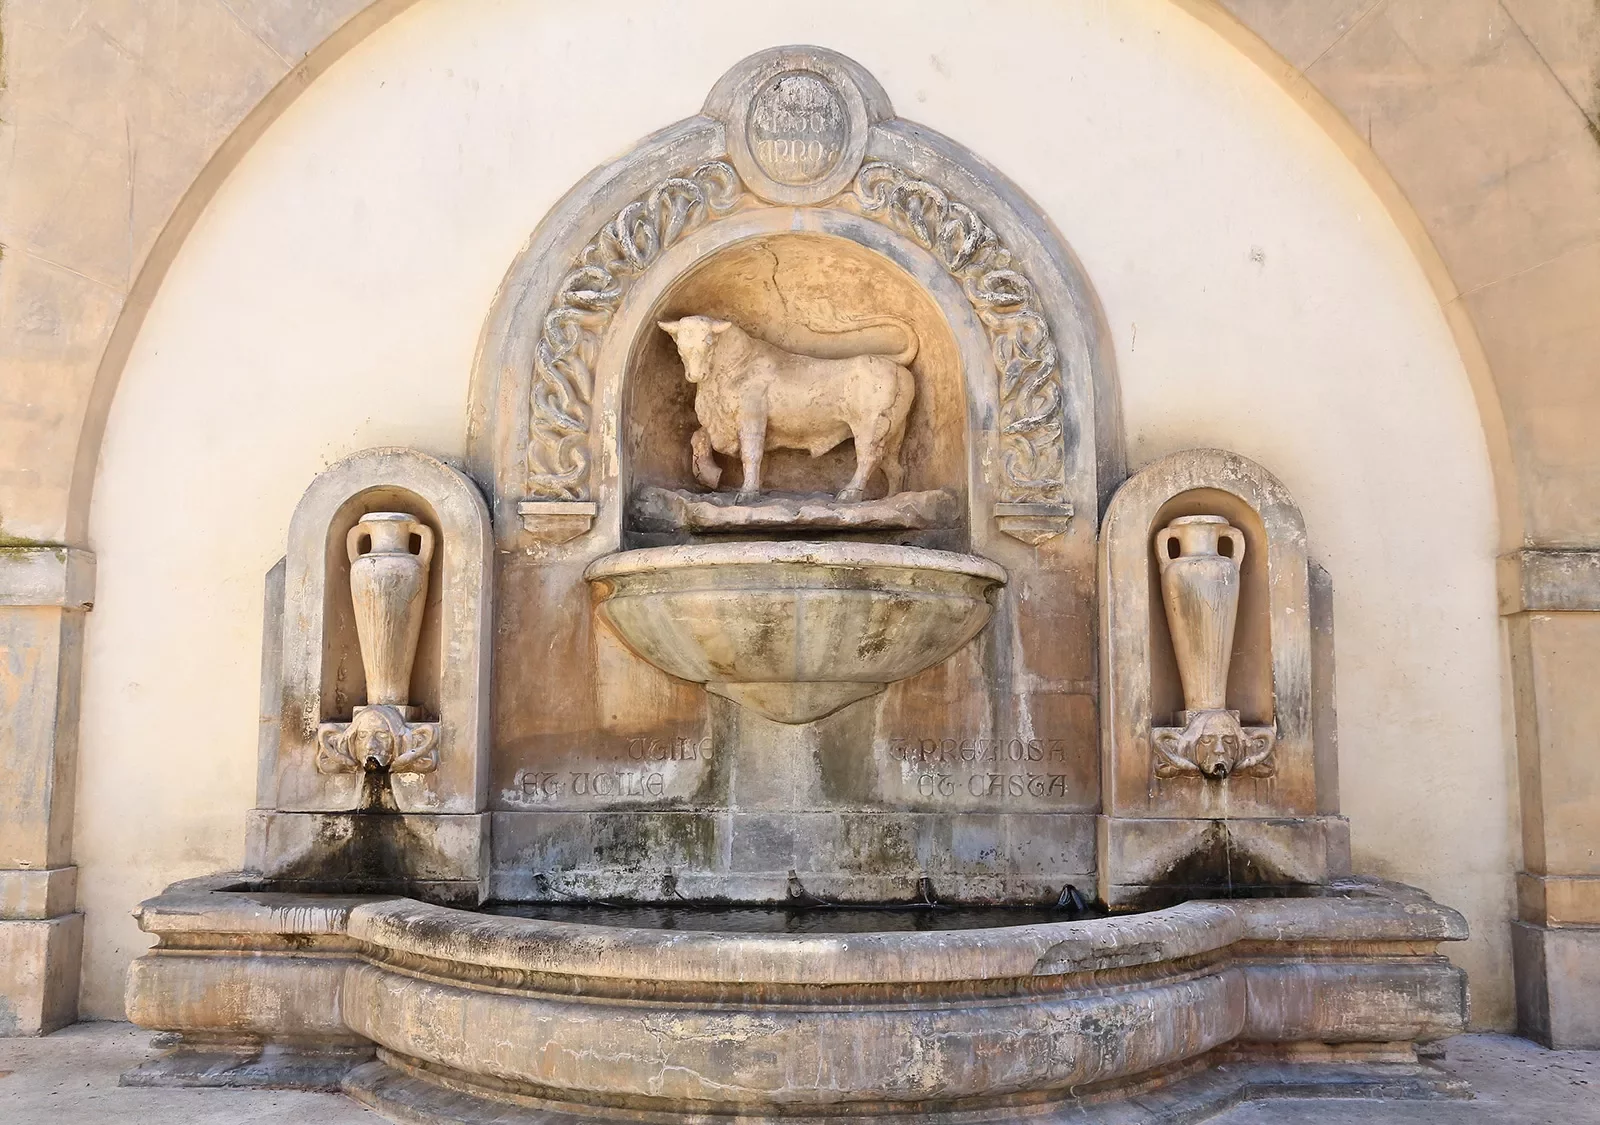 Fountain with a bull in the center and two vases on either side